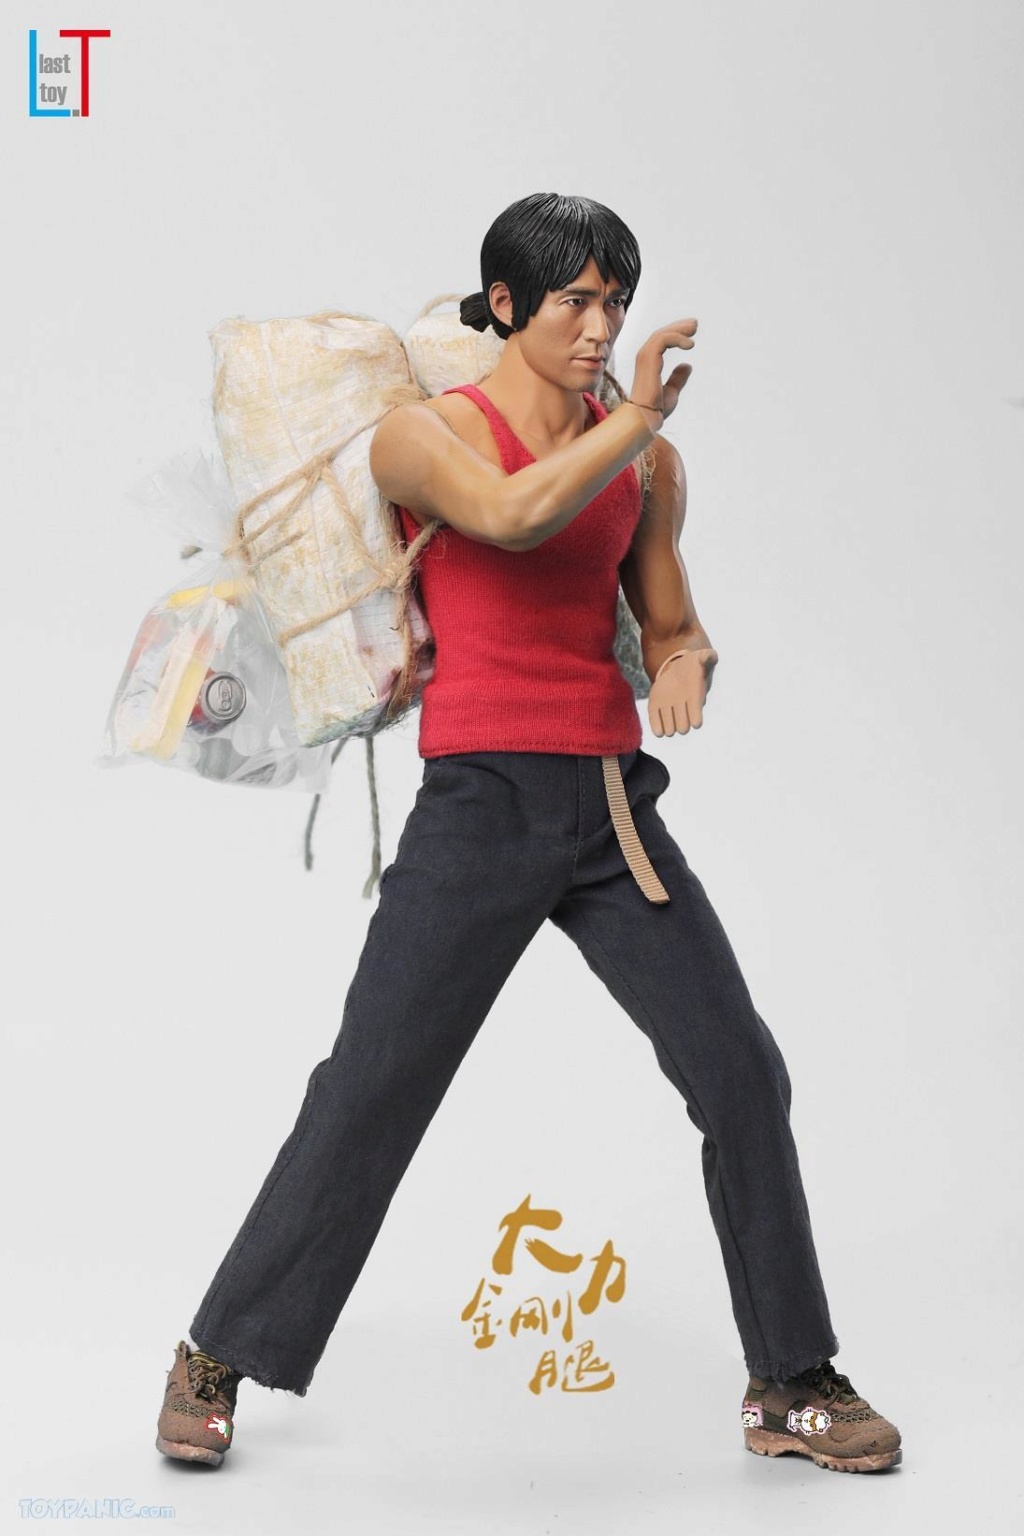 MightySteelLegSing - NEW PRODUCT: L.T Studio: 1/6 scale Mighty Steel Leg Sing Collectible Figure, Shaolin Soccer (Code: LT001) 10102011